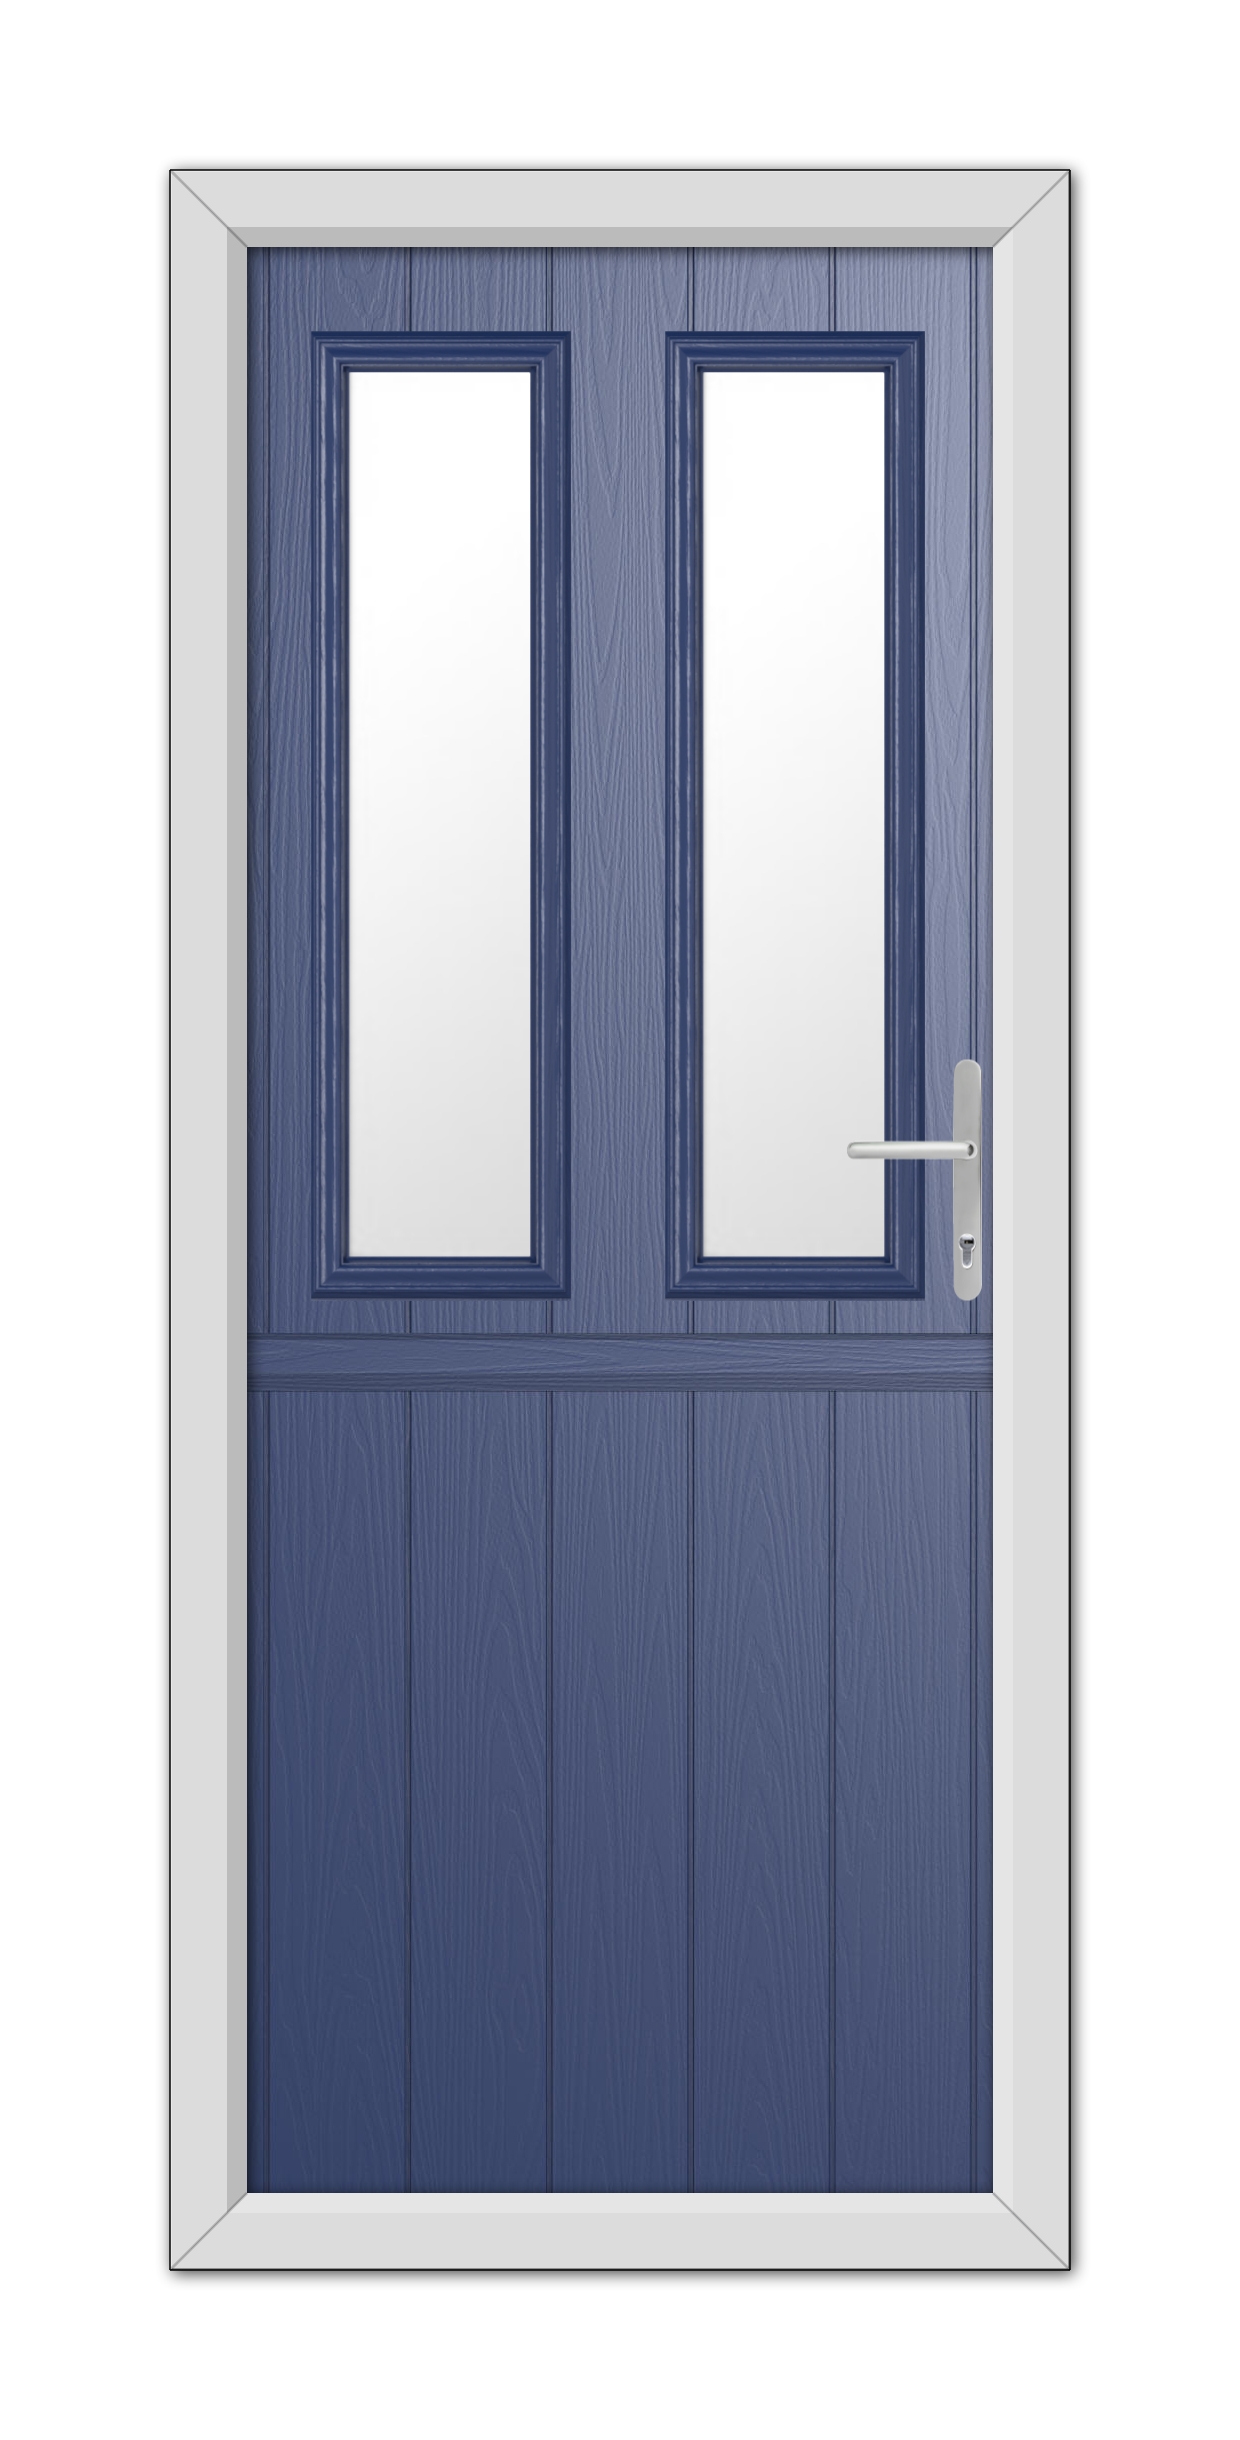 A Blue Wellington Stable Composite Door 48mm Timber Core with a deep blue finish, featuring upper windows, a white frame, and a modern handle on the right side.